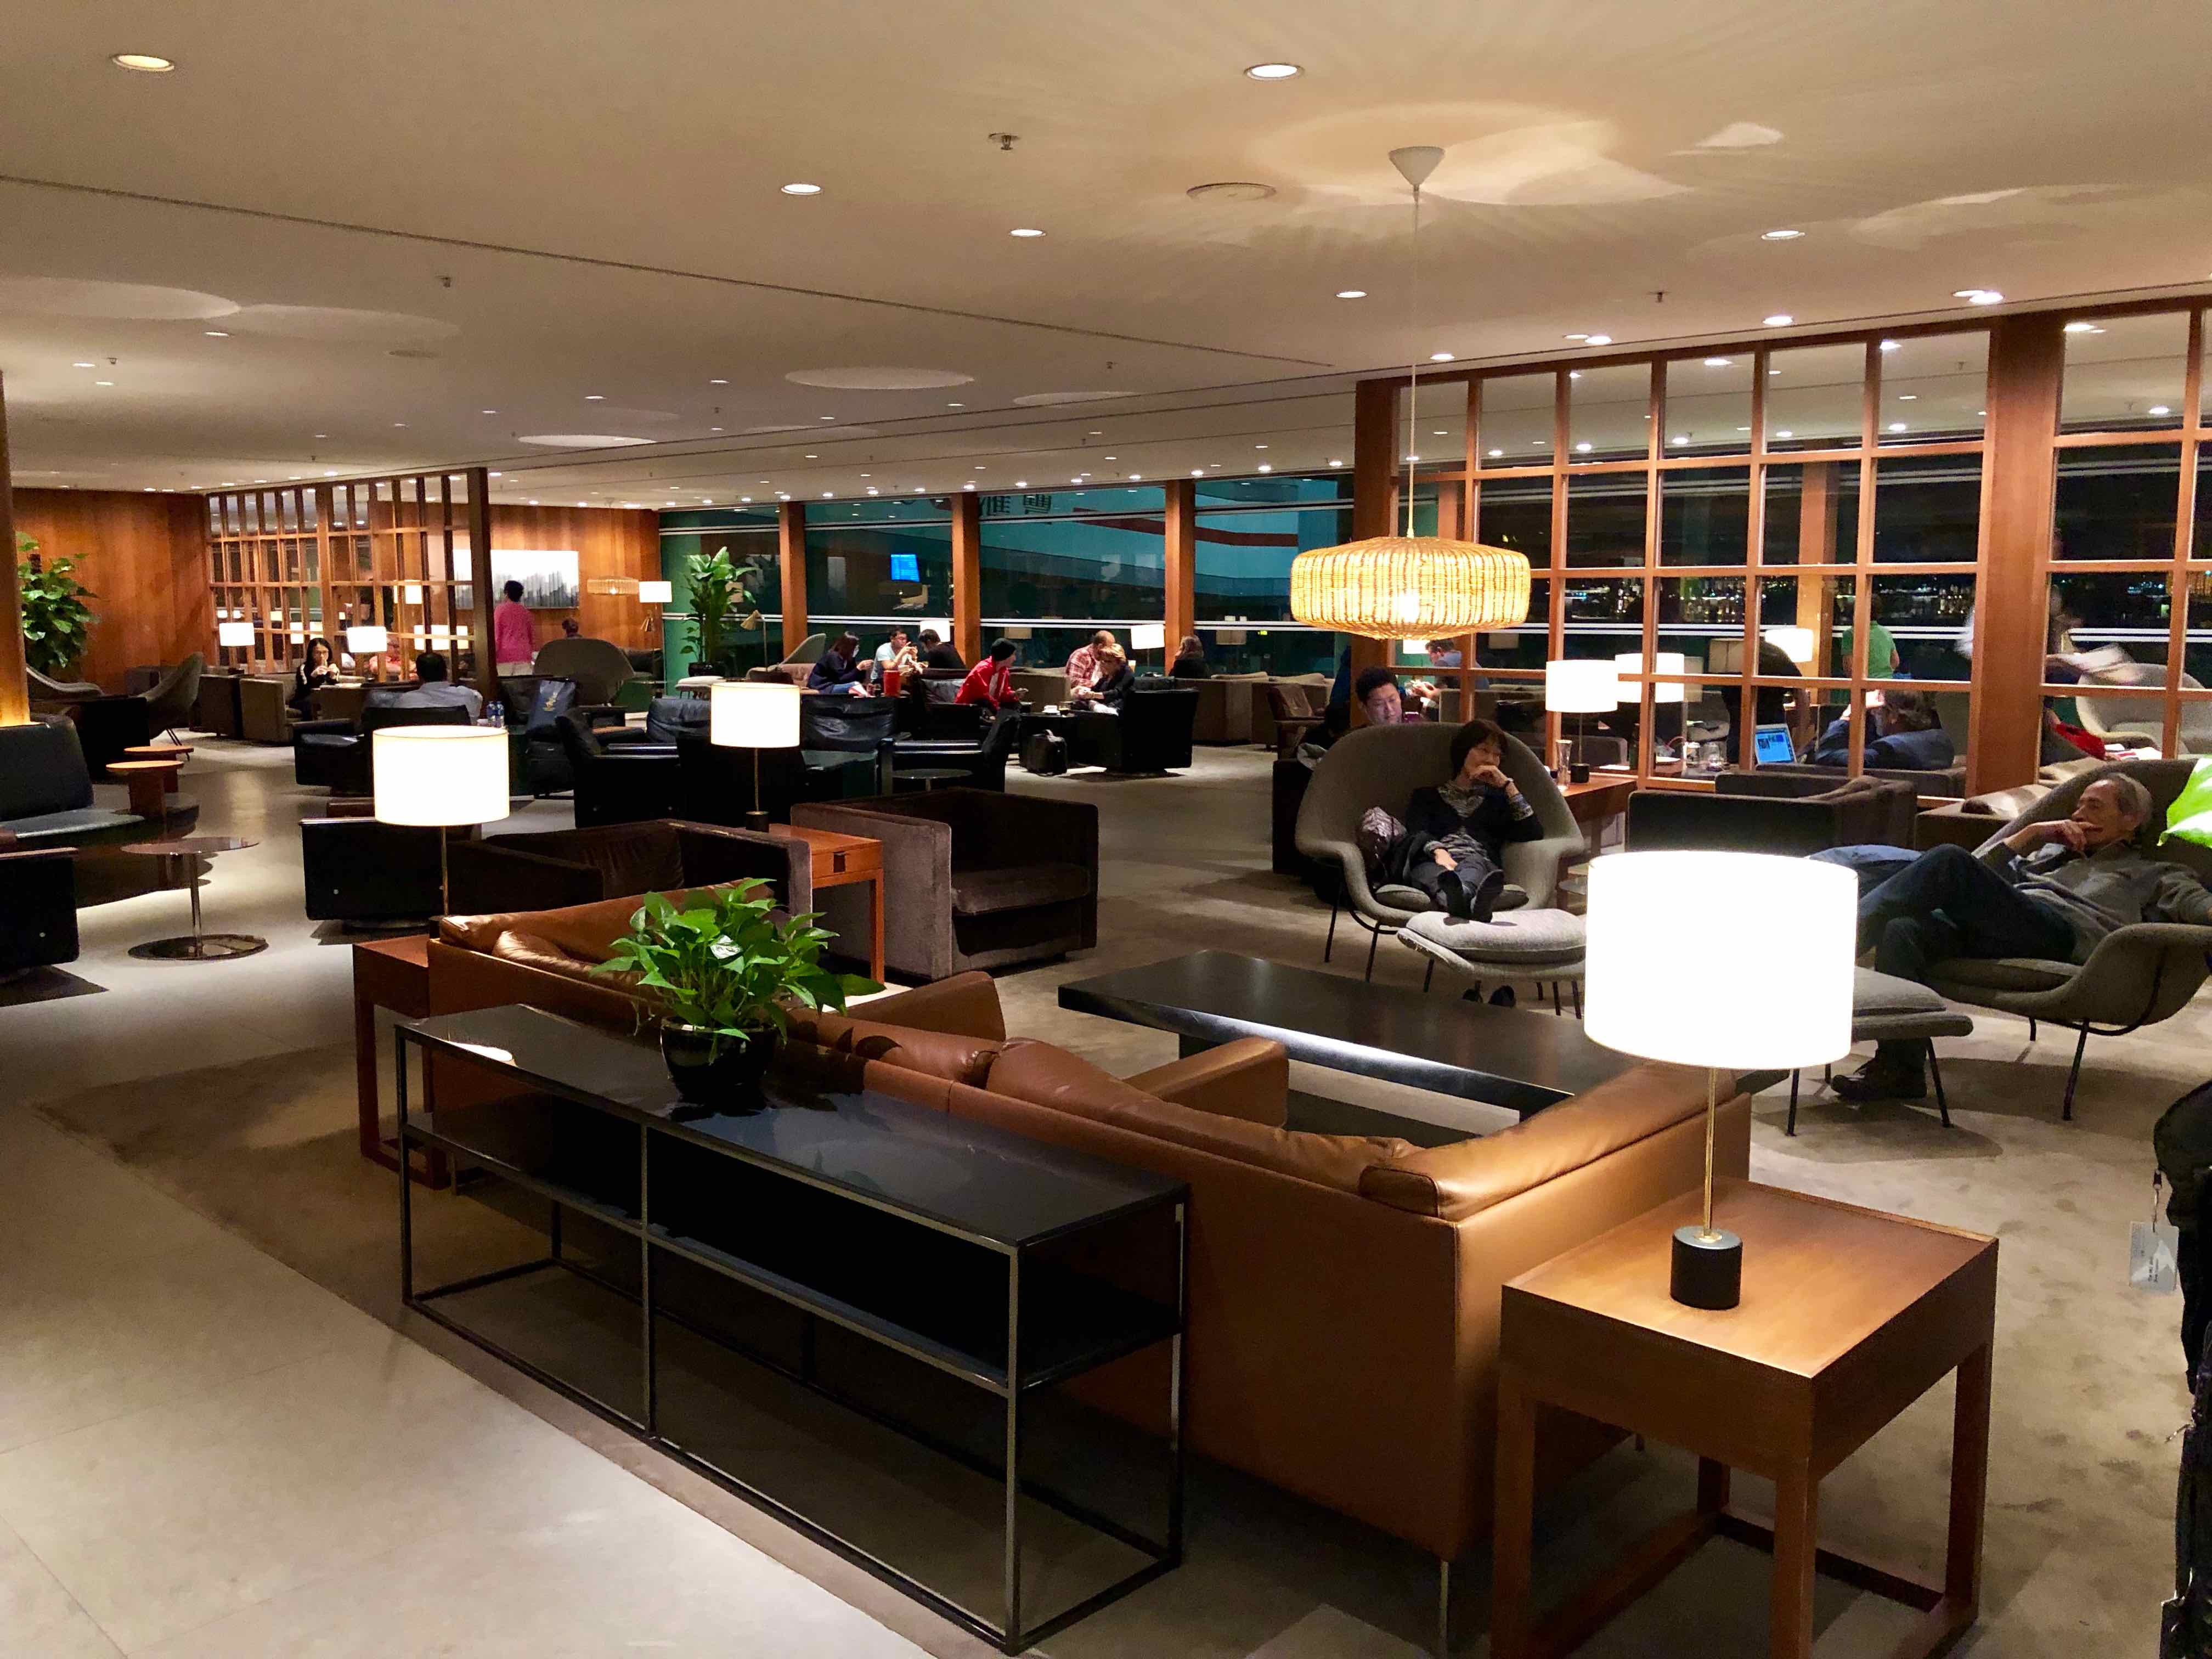 Cathay Pacific The Pier Business Class Lounge Hong Kong | Point Hacks